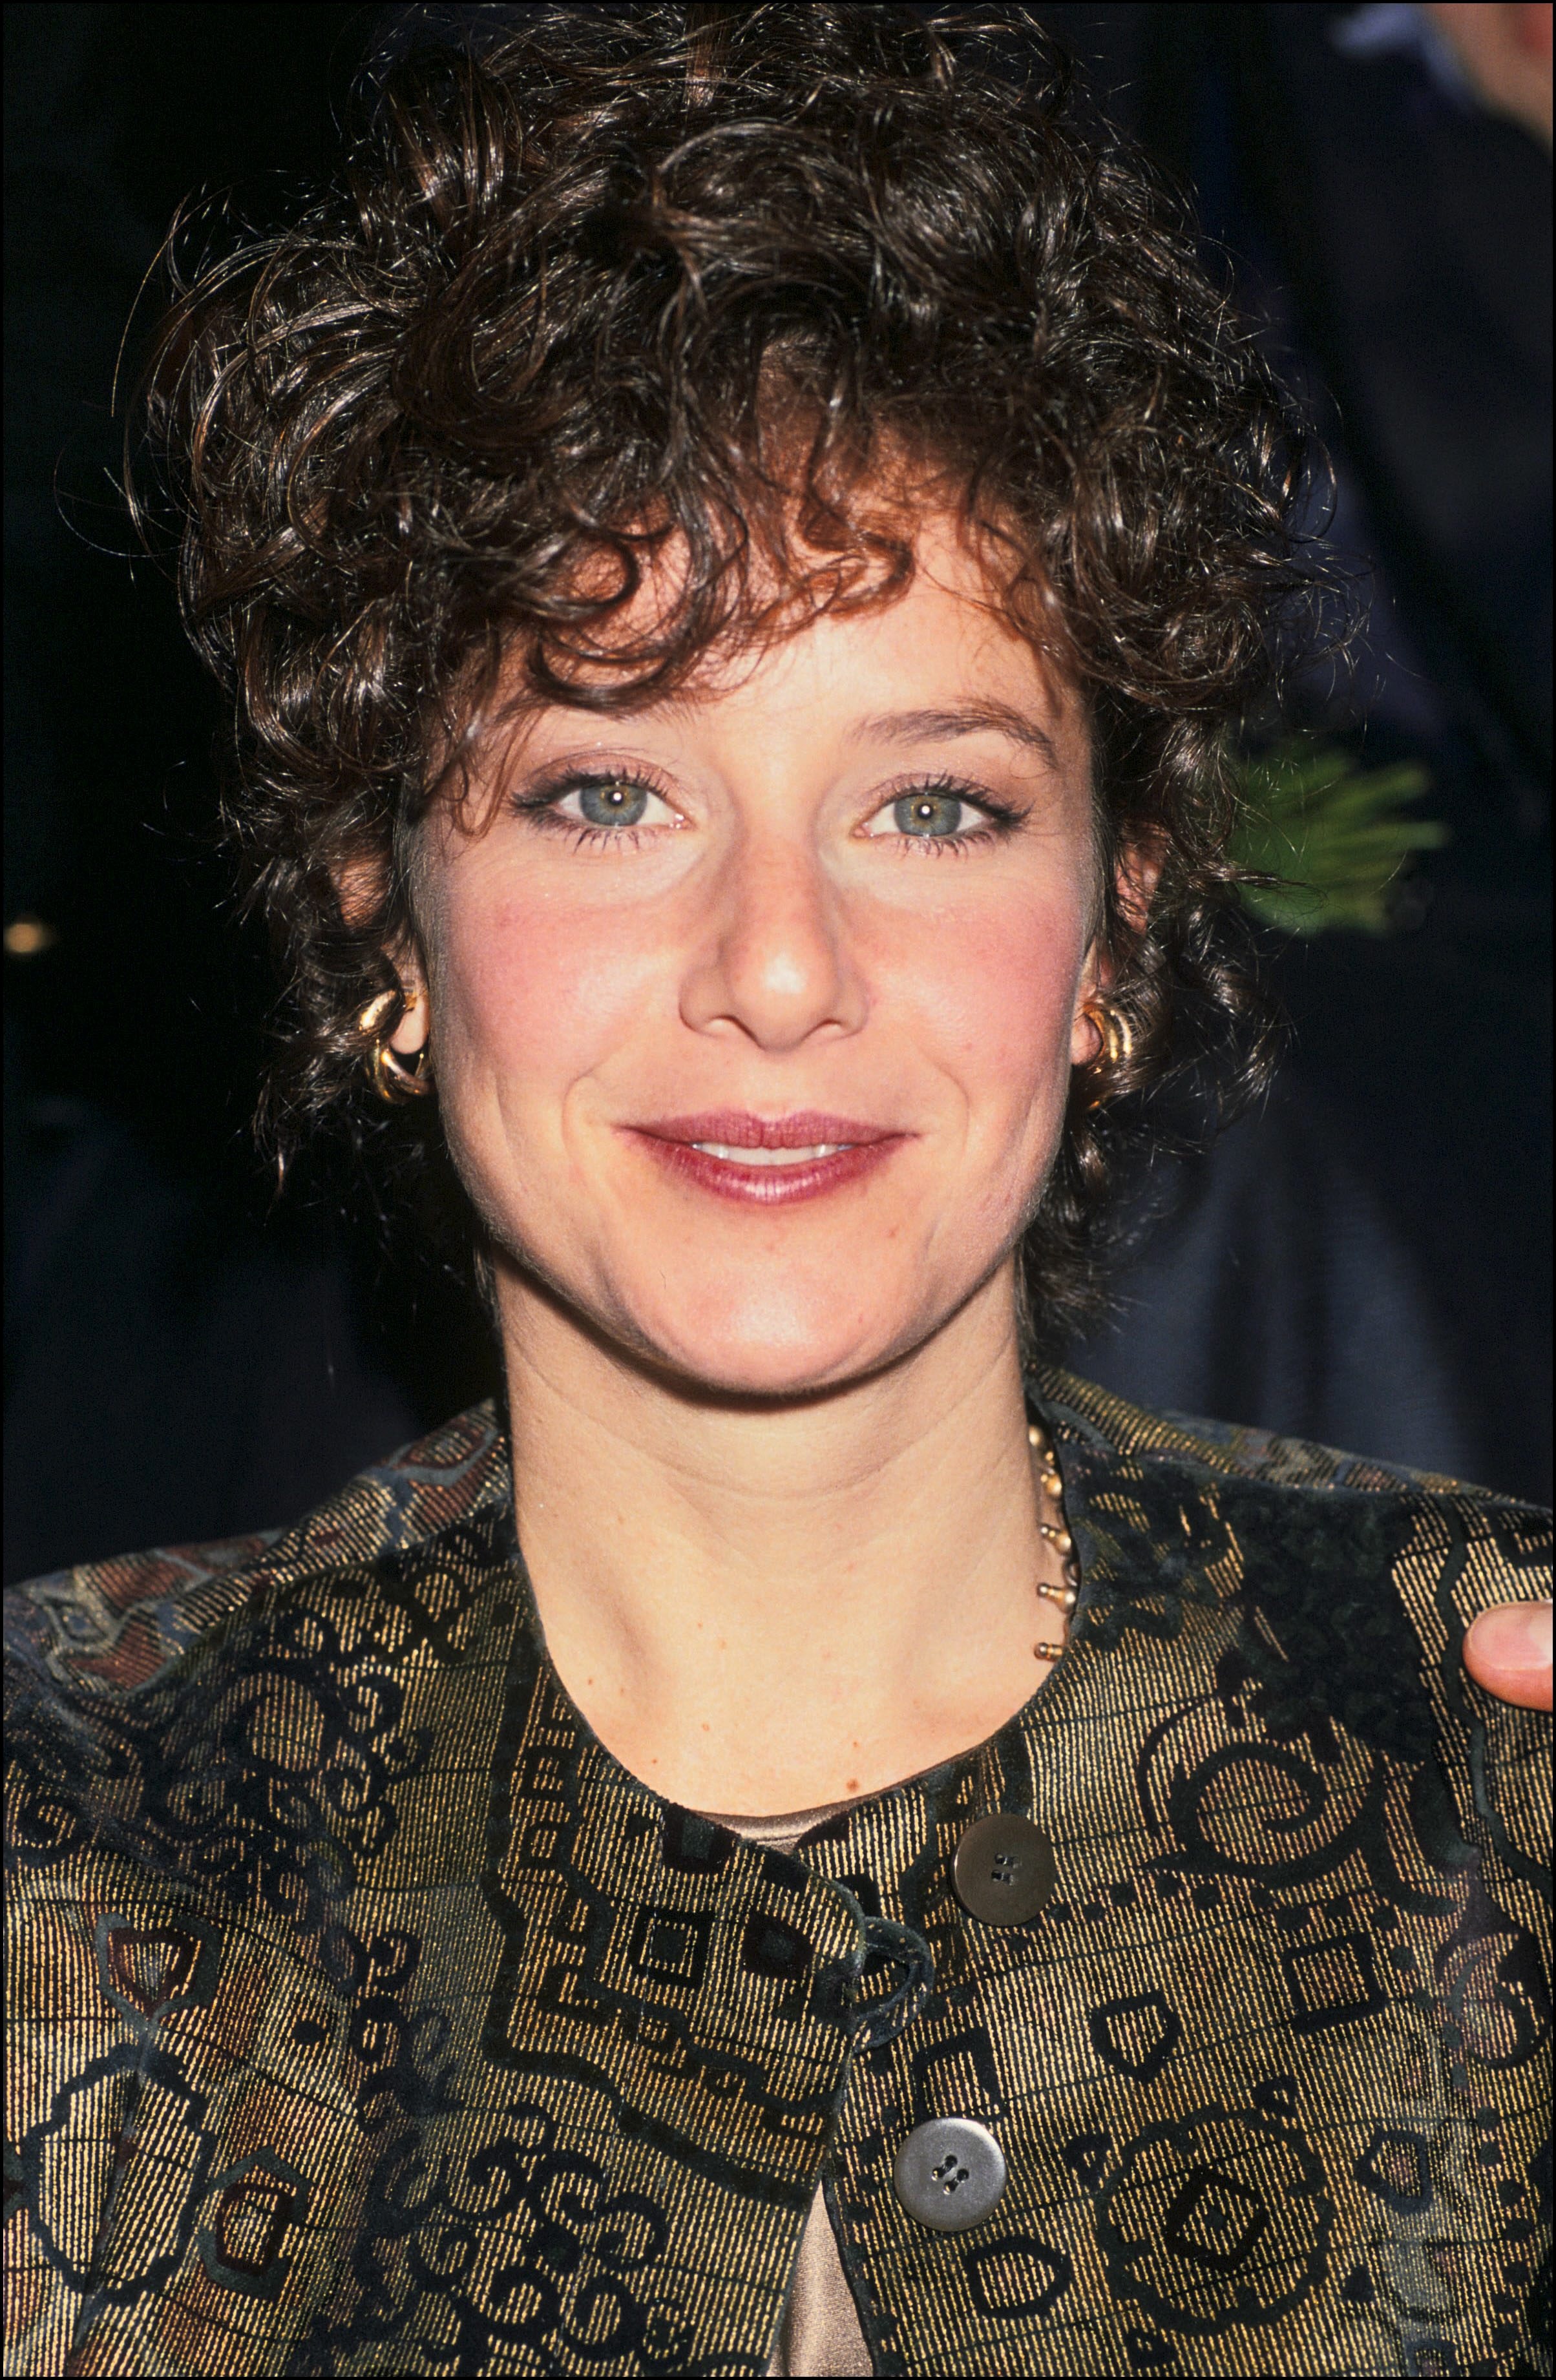 Debra Winger attends the premiere of "Un Tea in the Sahara," 1990 | Source: Getty Images